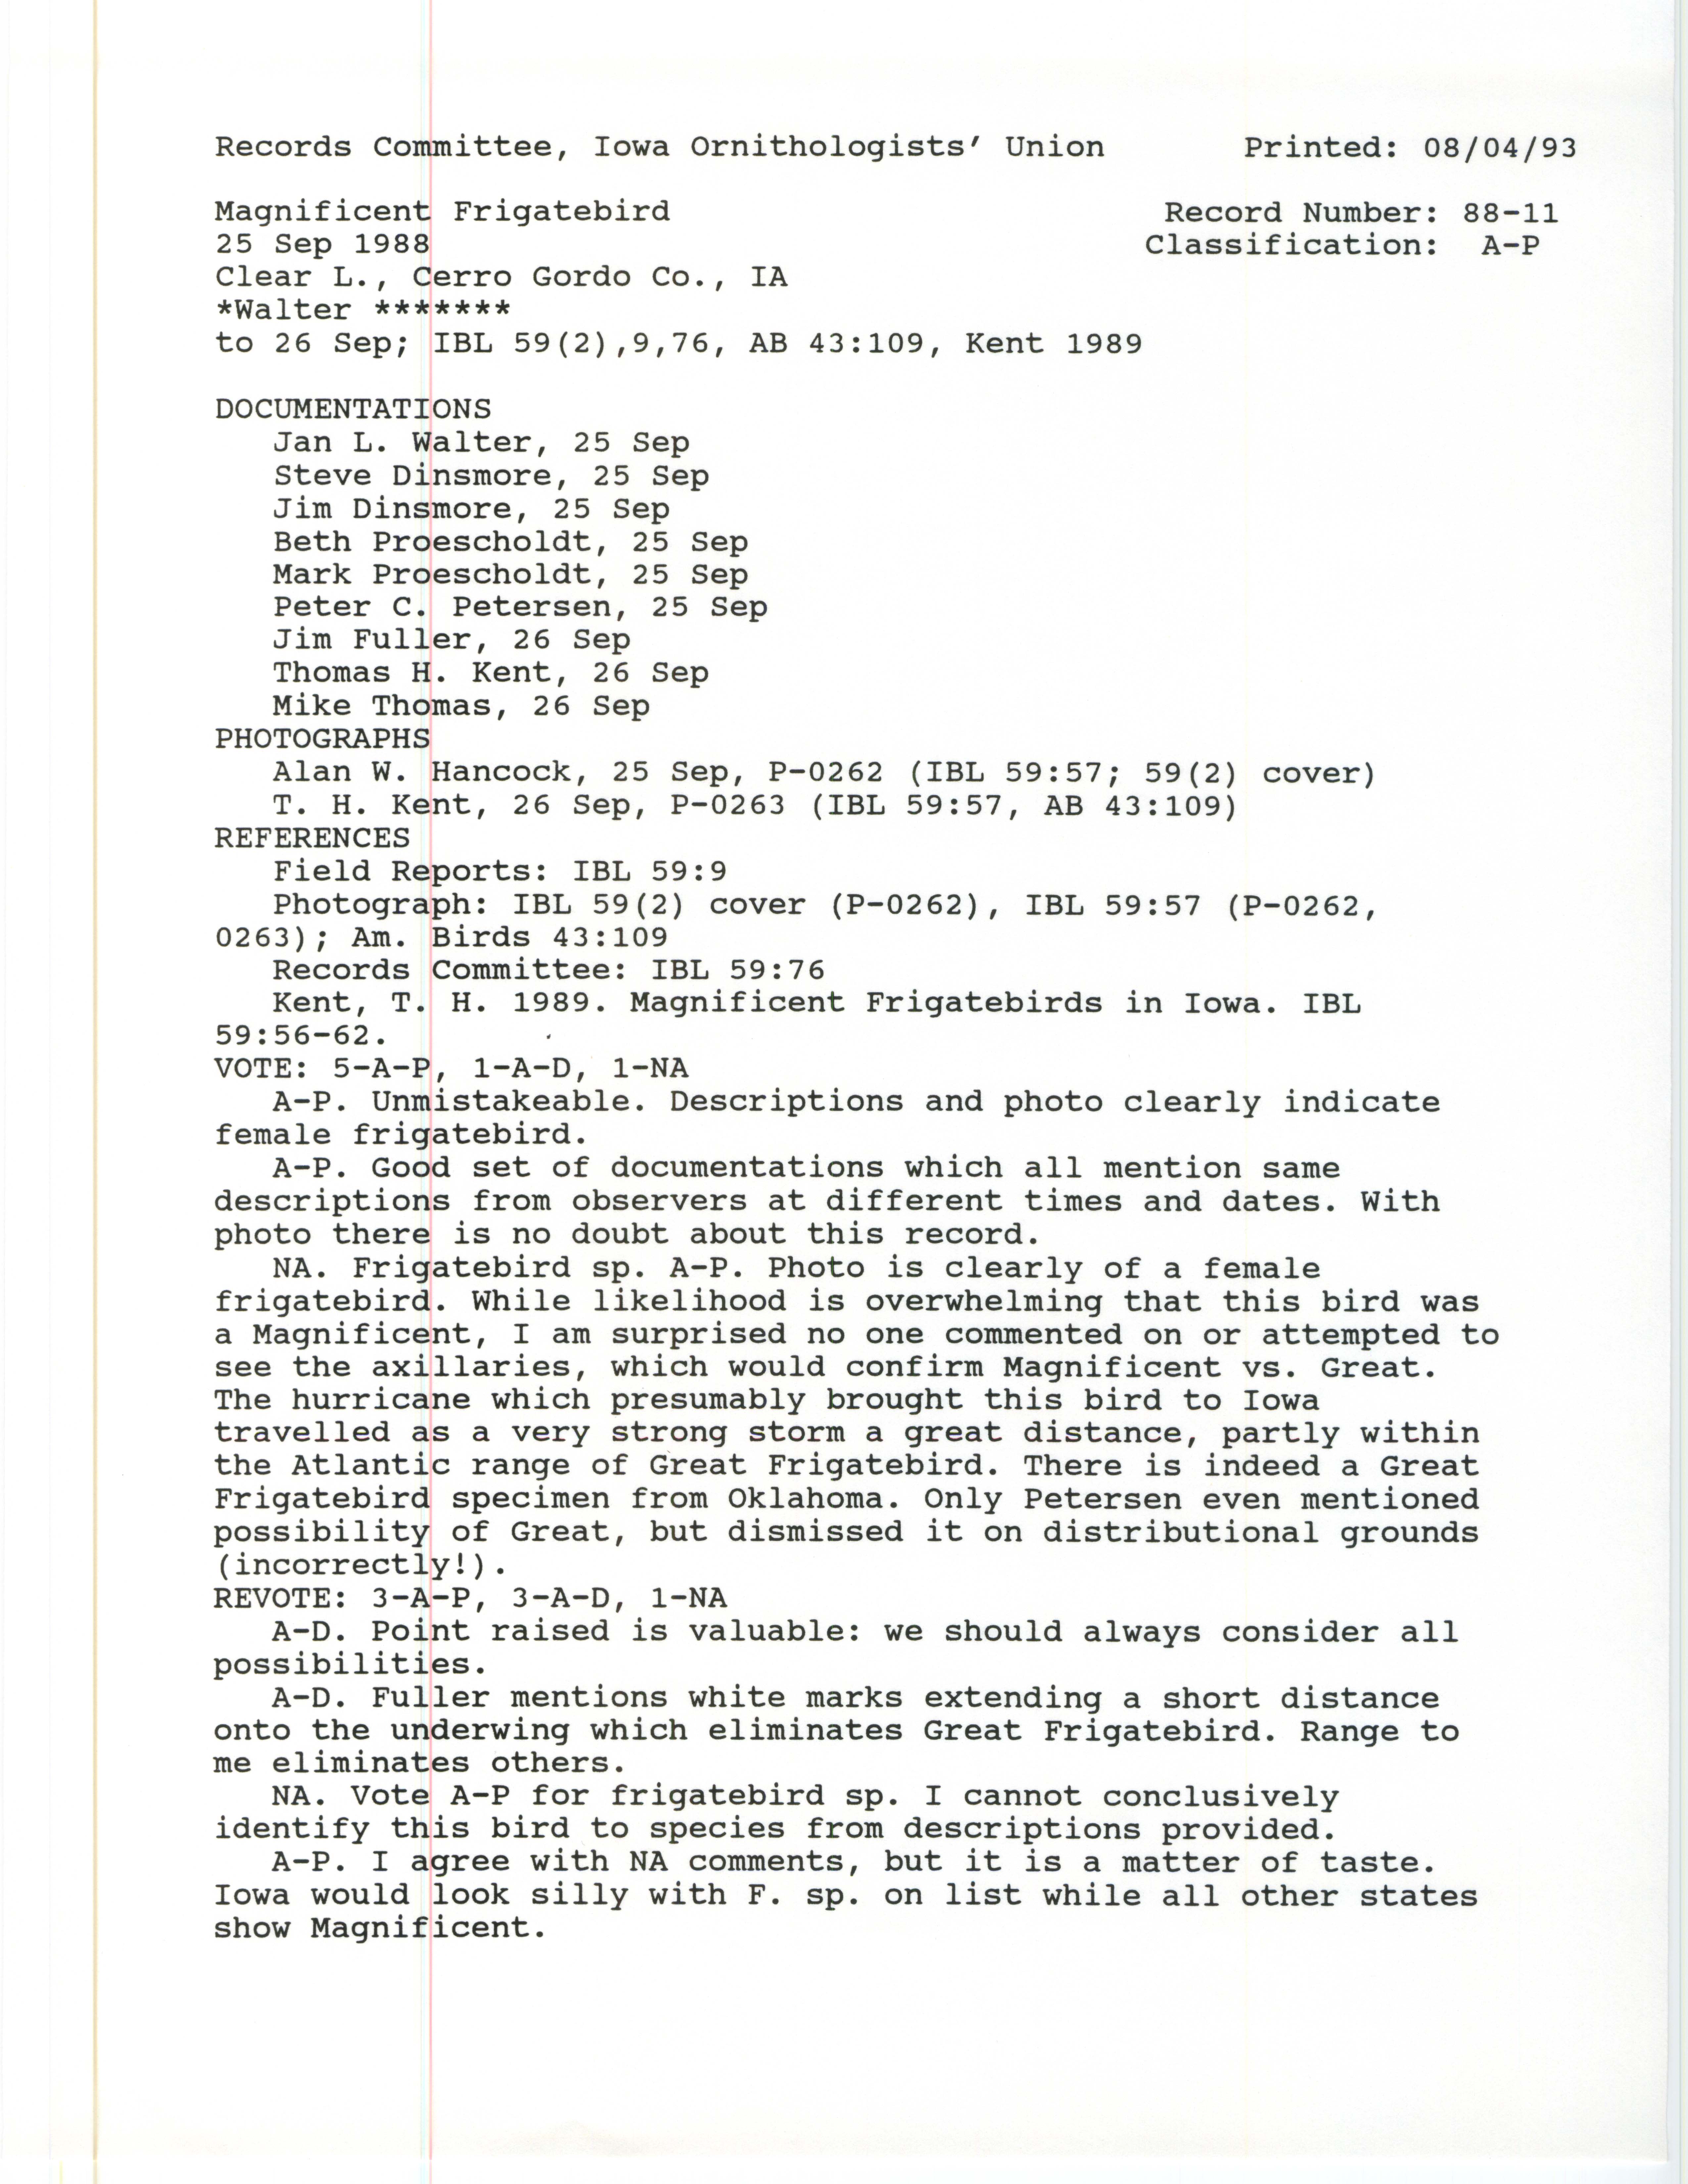 Records Committee review for bird sighting of Magnificent Frigatebird at Clear Lake, 1988